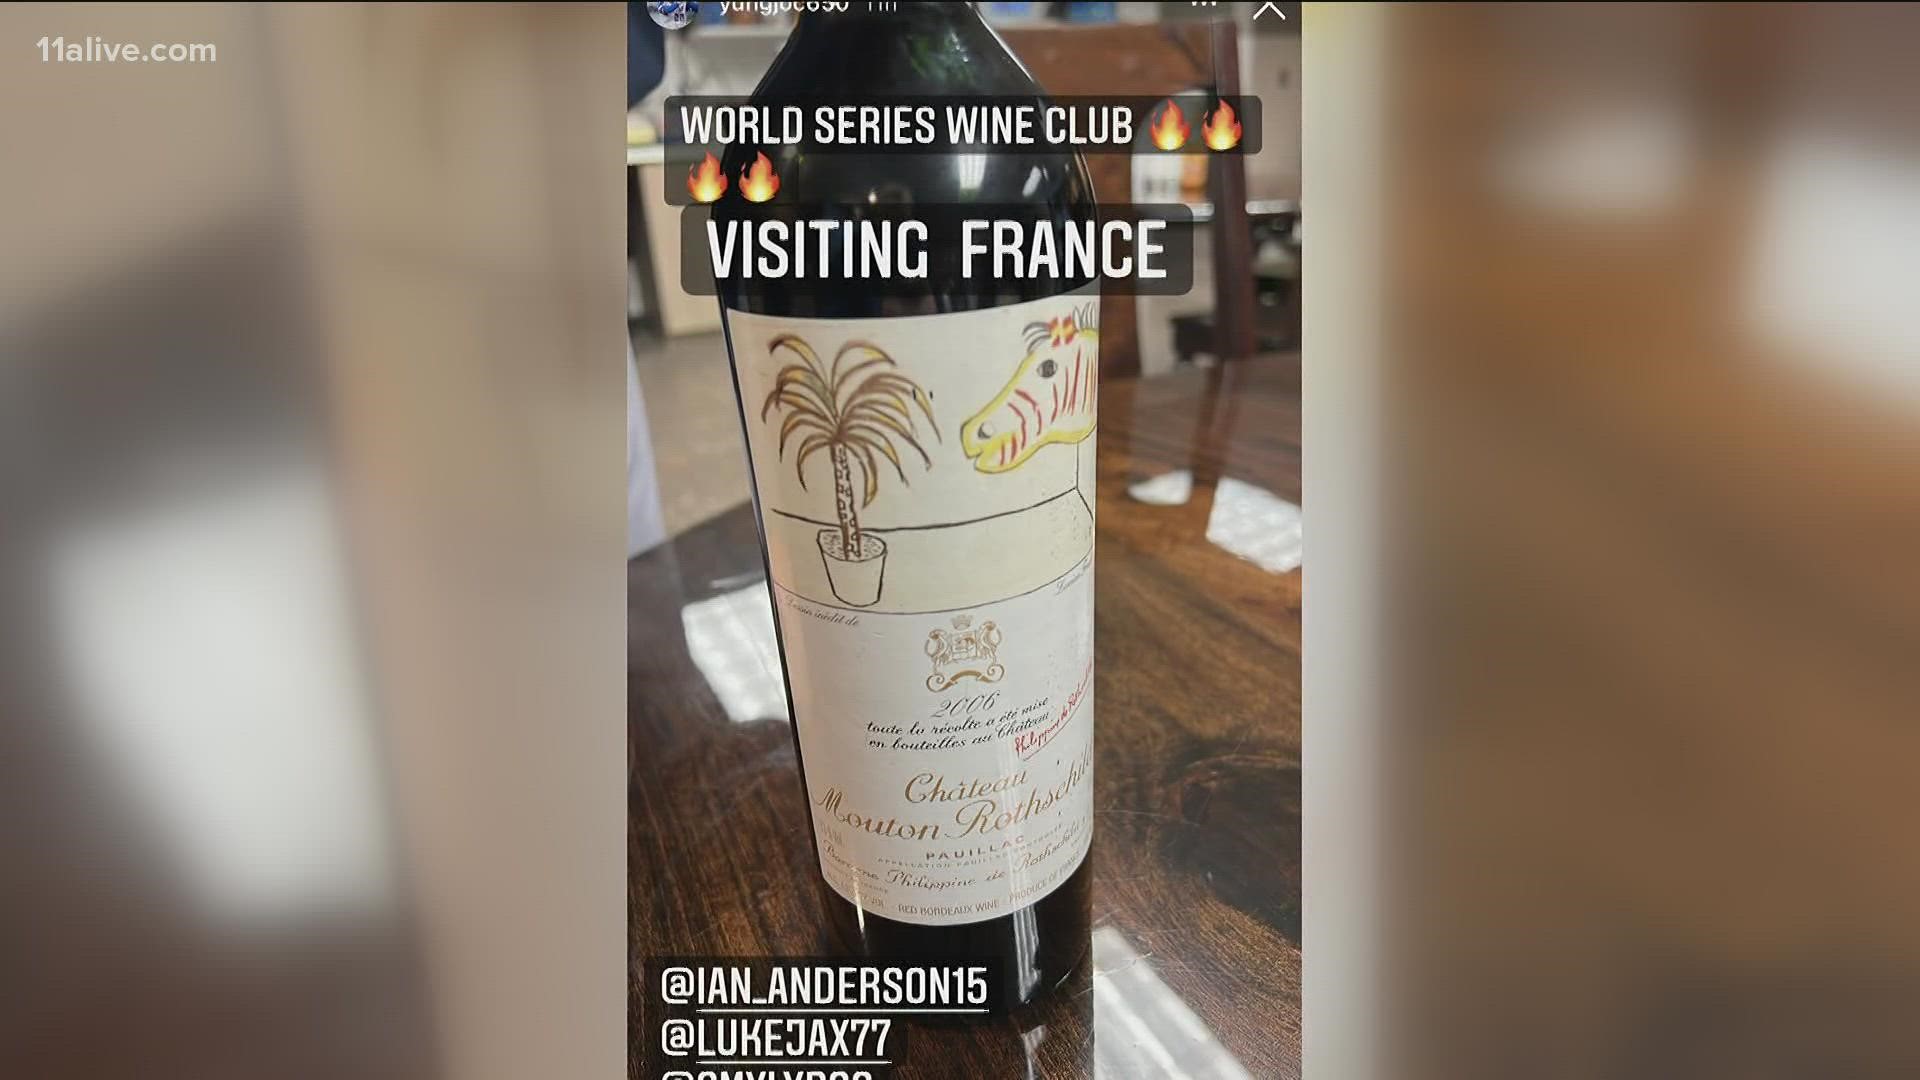 What started out as a collective effort among several Atlanta Braves players, the wine club is now a way for them to toast their wins.